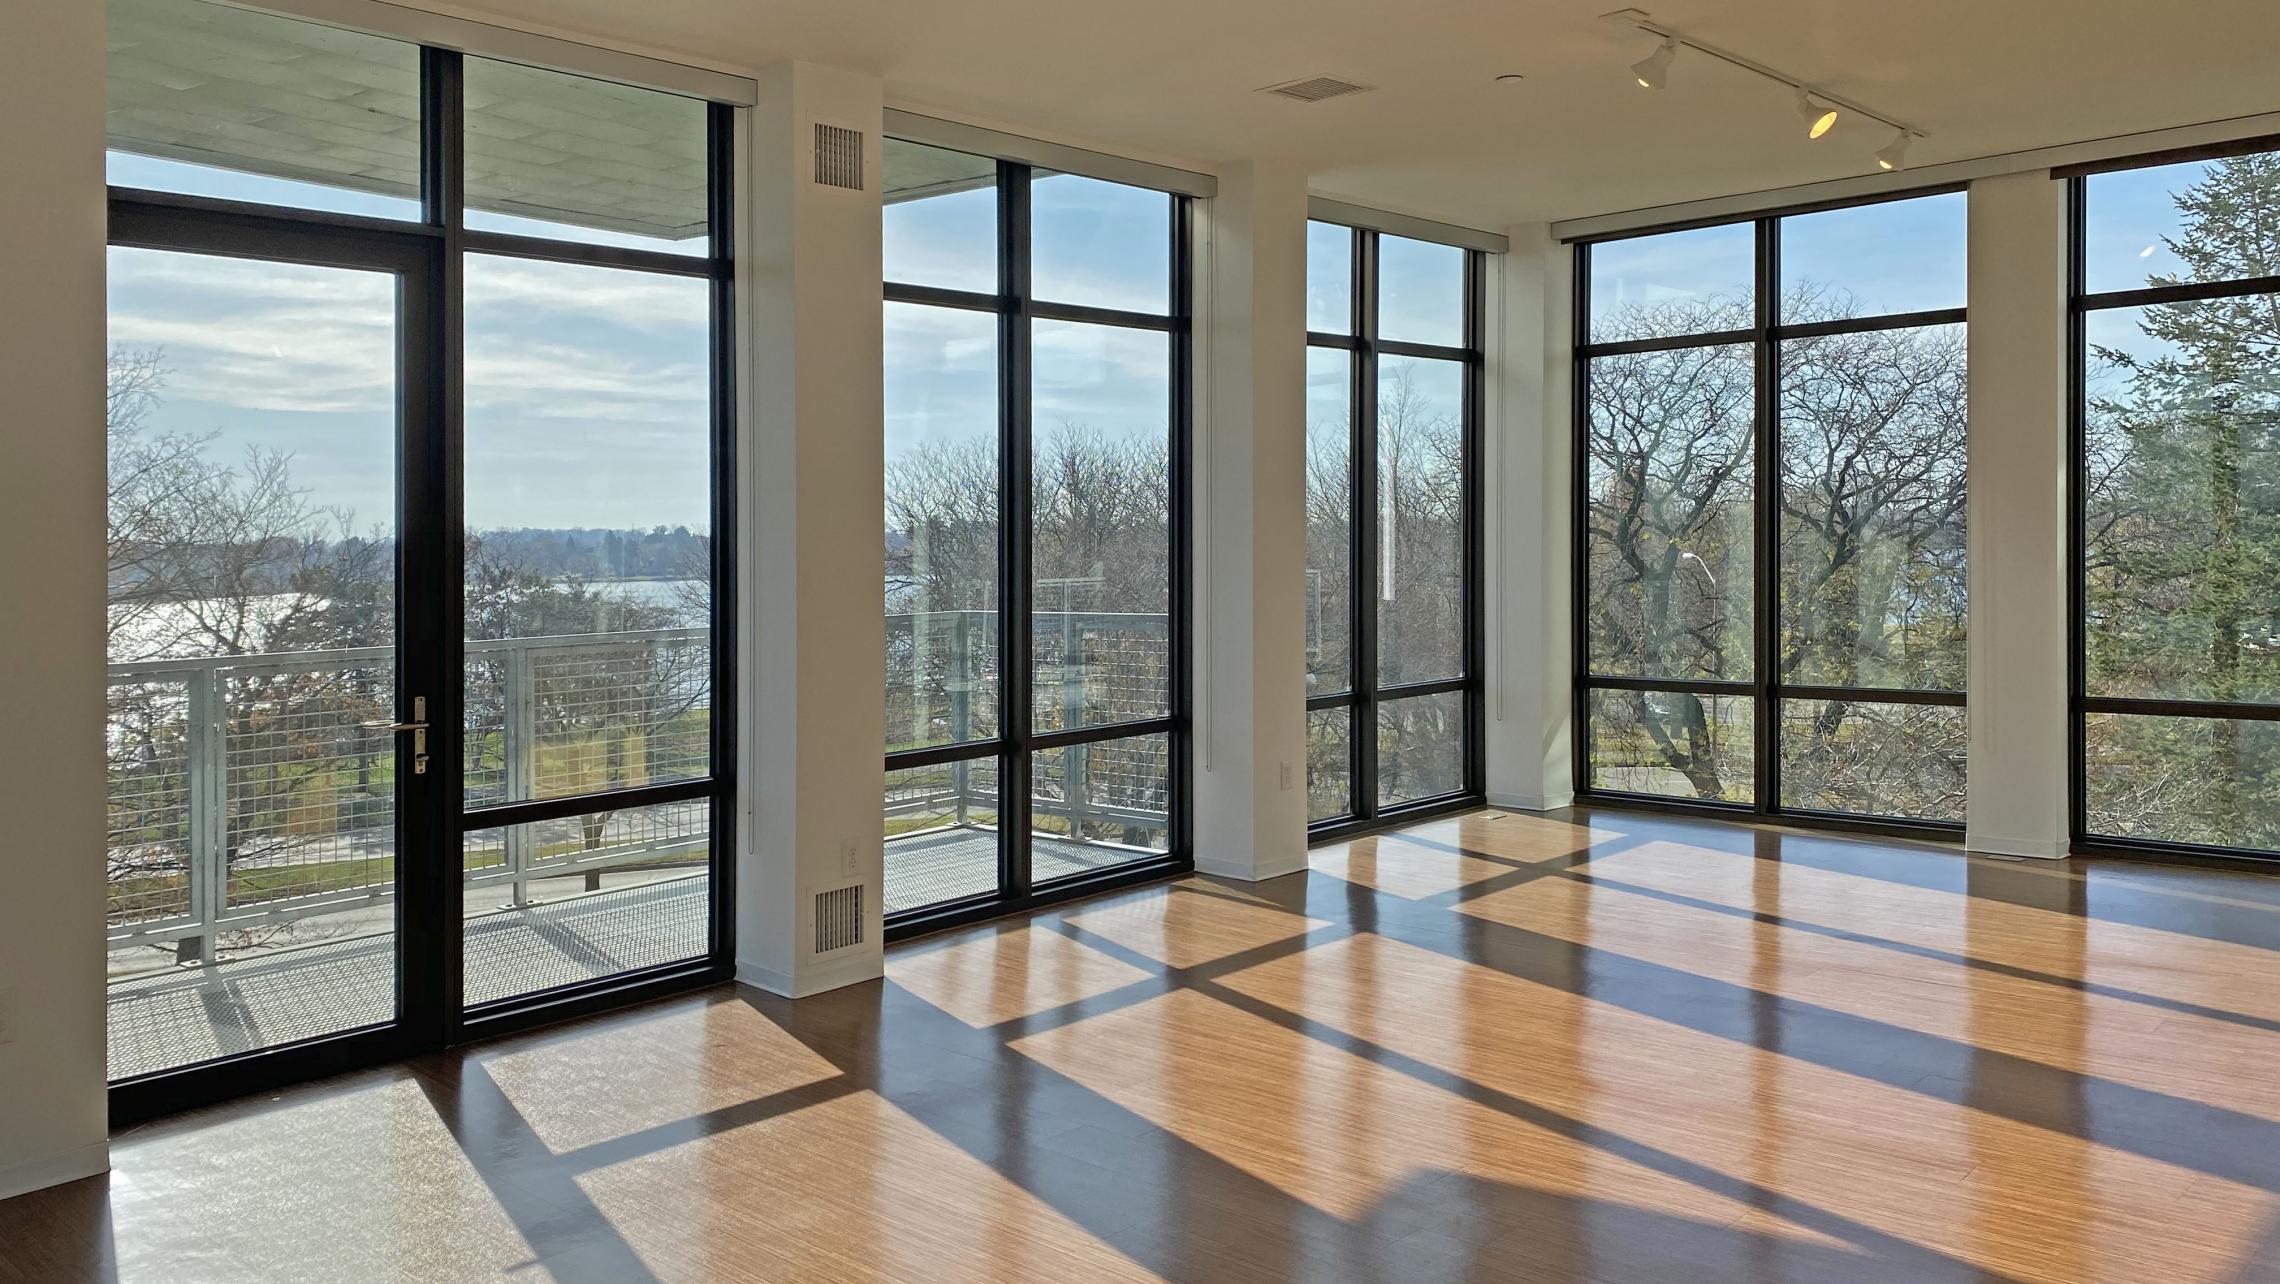 SEVEN27-The-Yards-Apartment-340-Two-Bedroom-Windows-Natural-Light-Stunning-Lake-View-Cats-Dogs-Balcony-Lounge-Modern-Upscale-Luxury-Kitchen-Bathroom-Design-Downtown-Madison